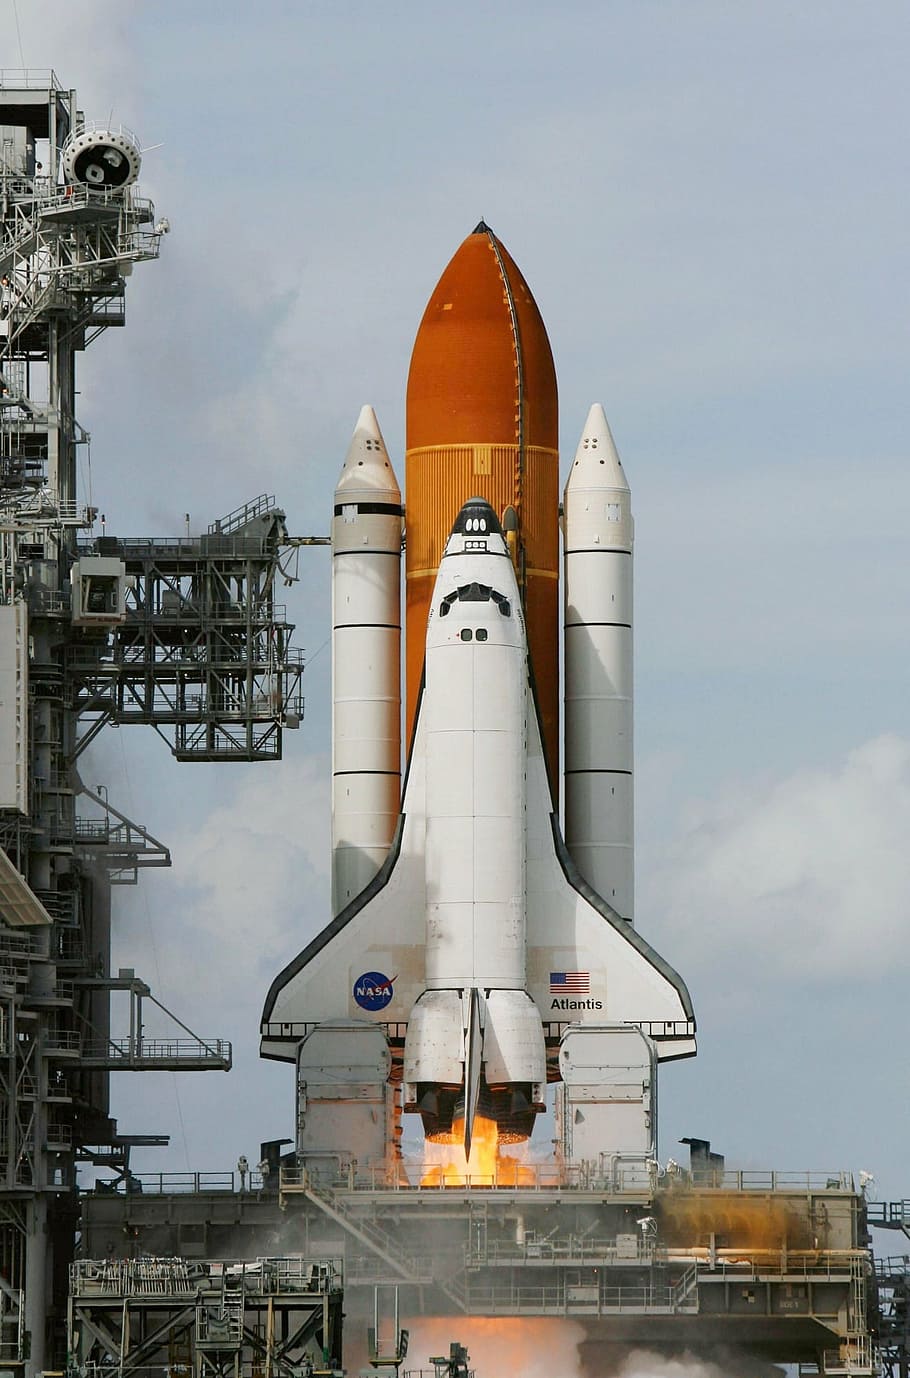 nasa space shuttle, taking, ground, space shuttle atlantis, liftoff, launch, flames, launchpad, rocket boosters, exploration